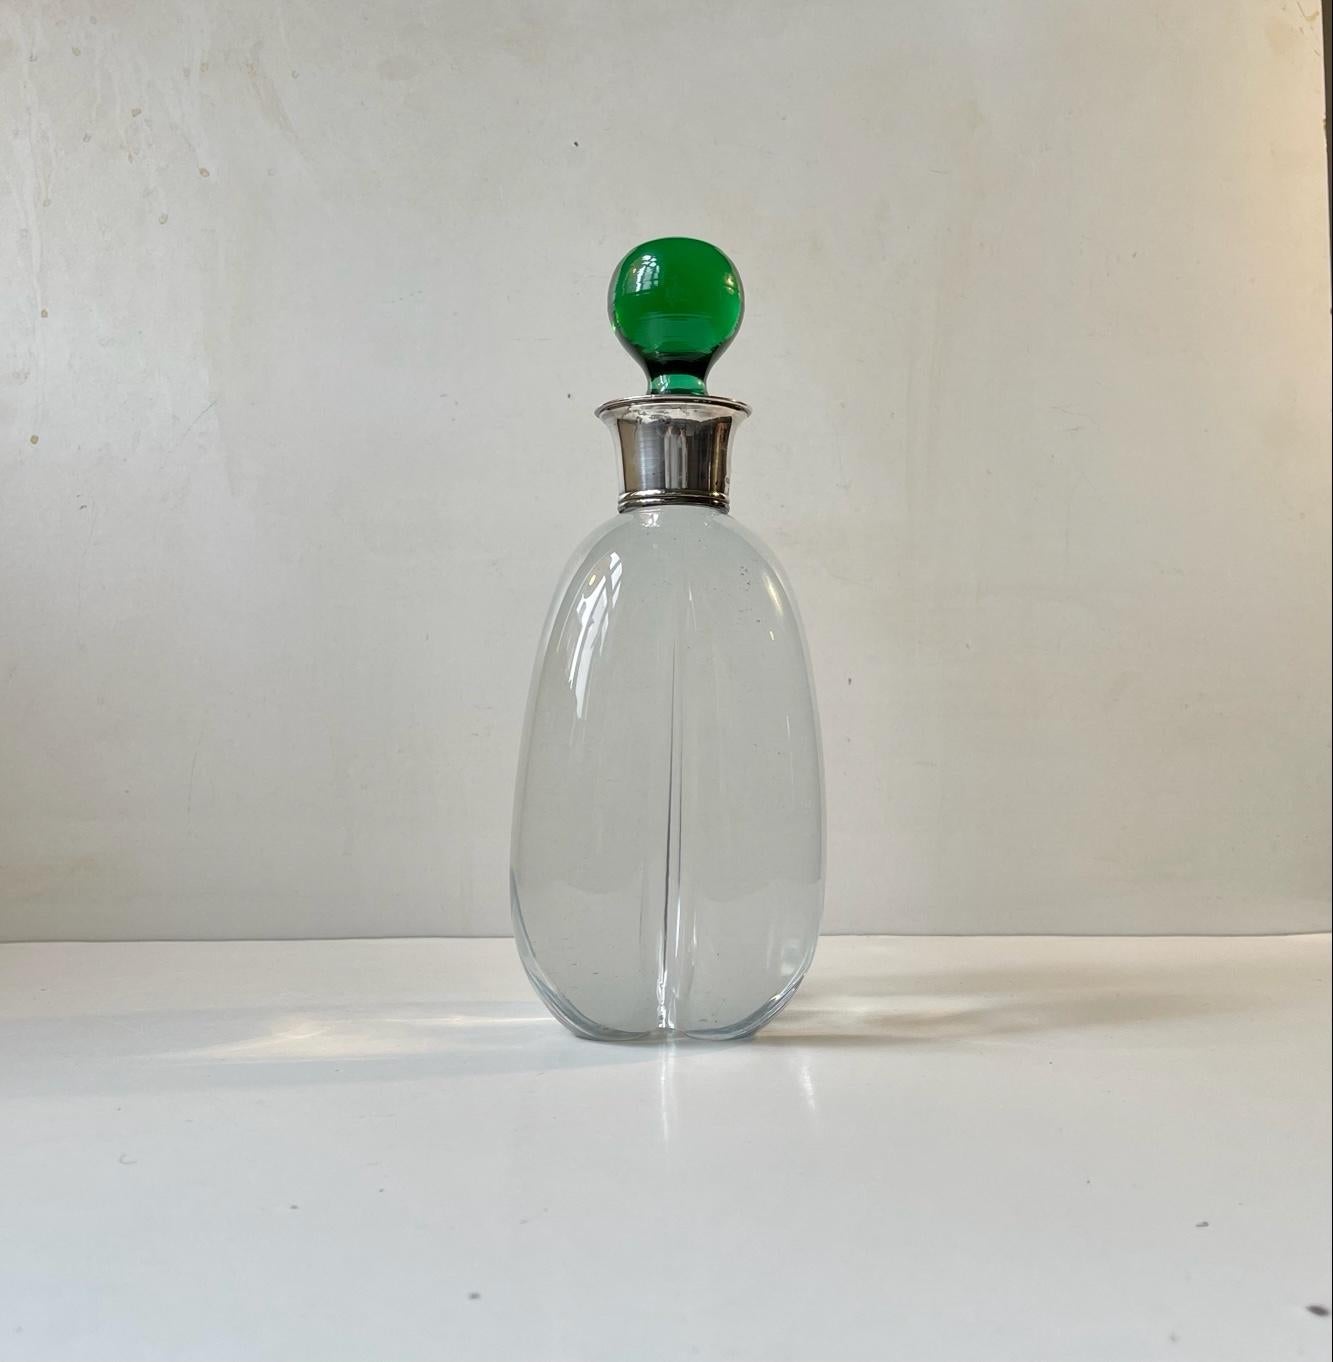 Organically shaped pumpkin decanter in crystal. It is set with a bottle neck in 830/1000 silver designed and made by Carl F. Christensen in Copenhagen Denmark during the 1930s. Fully hallmarked. The green spherical glass stopper may be a later